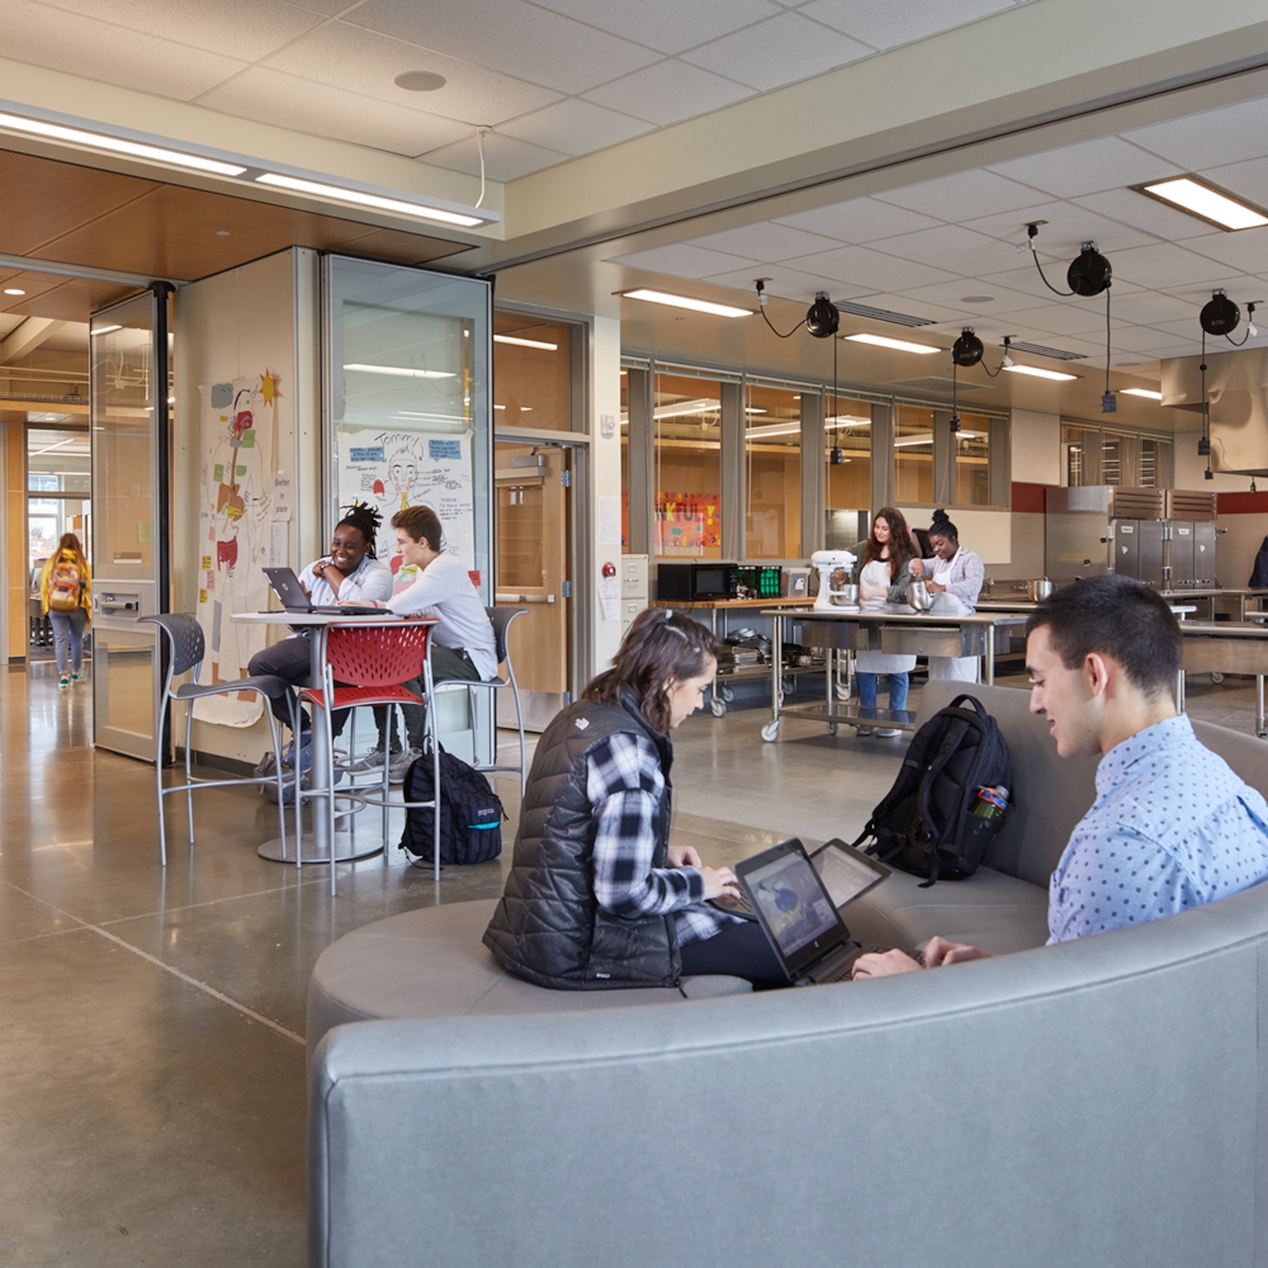 Flexible furniture which accommodates movement can increase boys’ attention span. Wilson High School — NAC Architecture